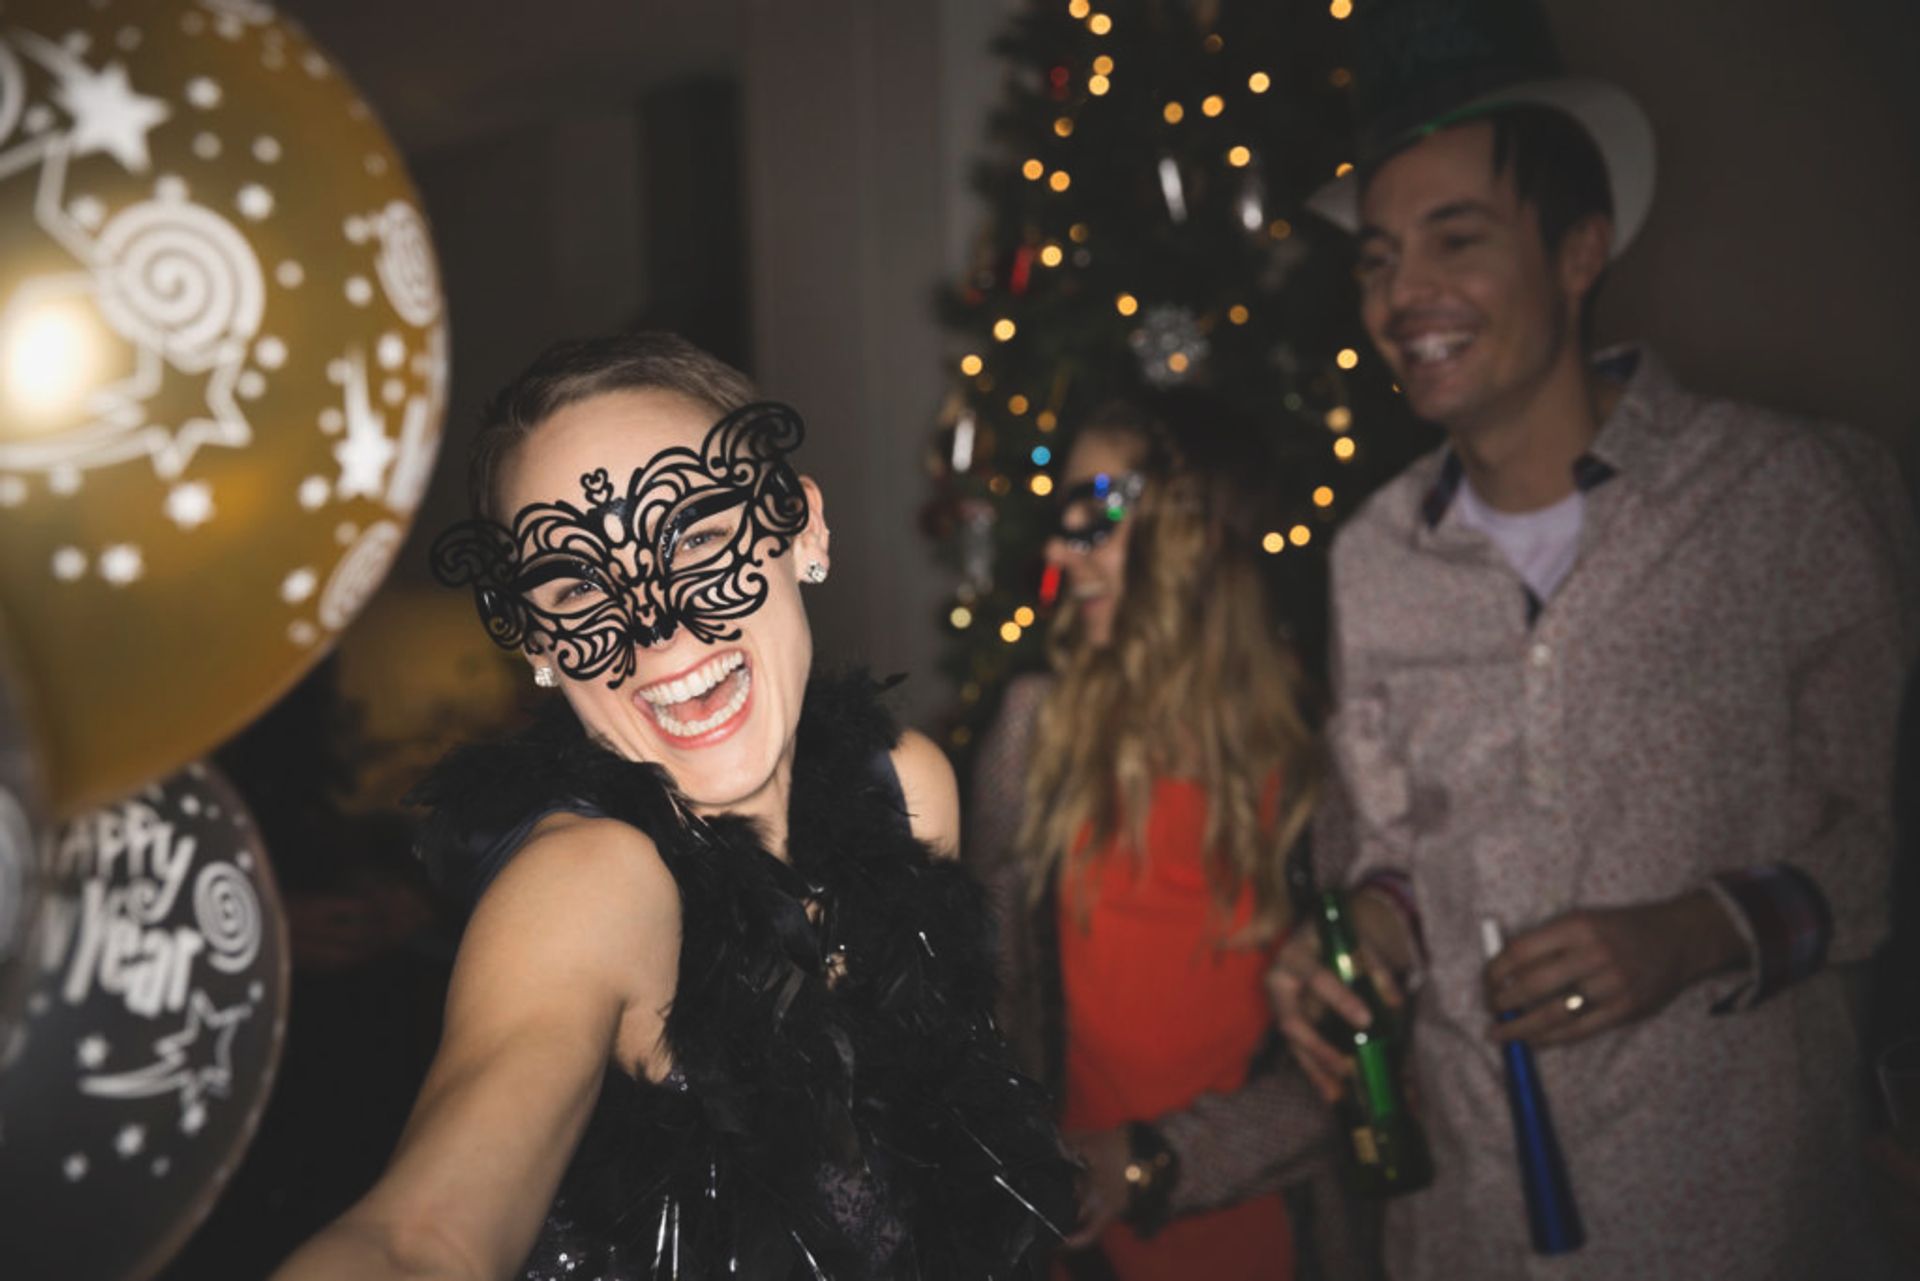 People having a great time at a party. A woman is smiling at the camera with a black decorated mask. It is a man and a woman smiling in the background.